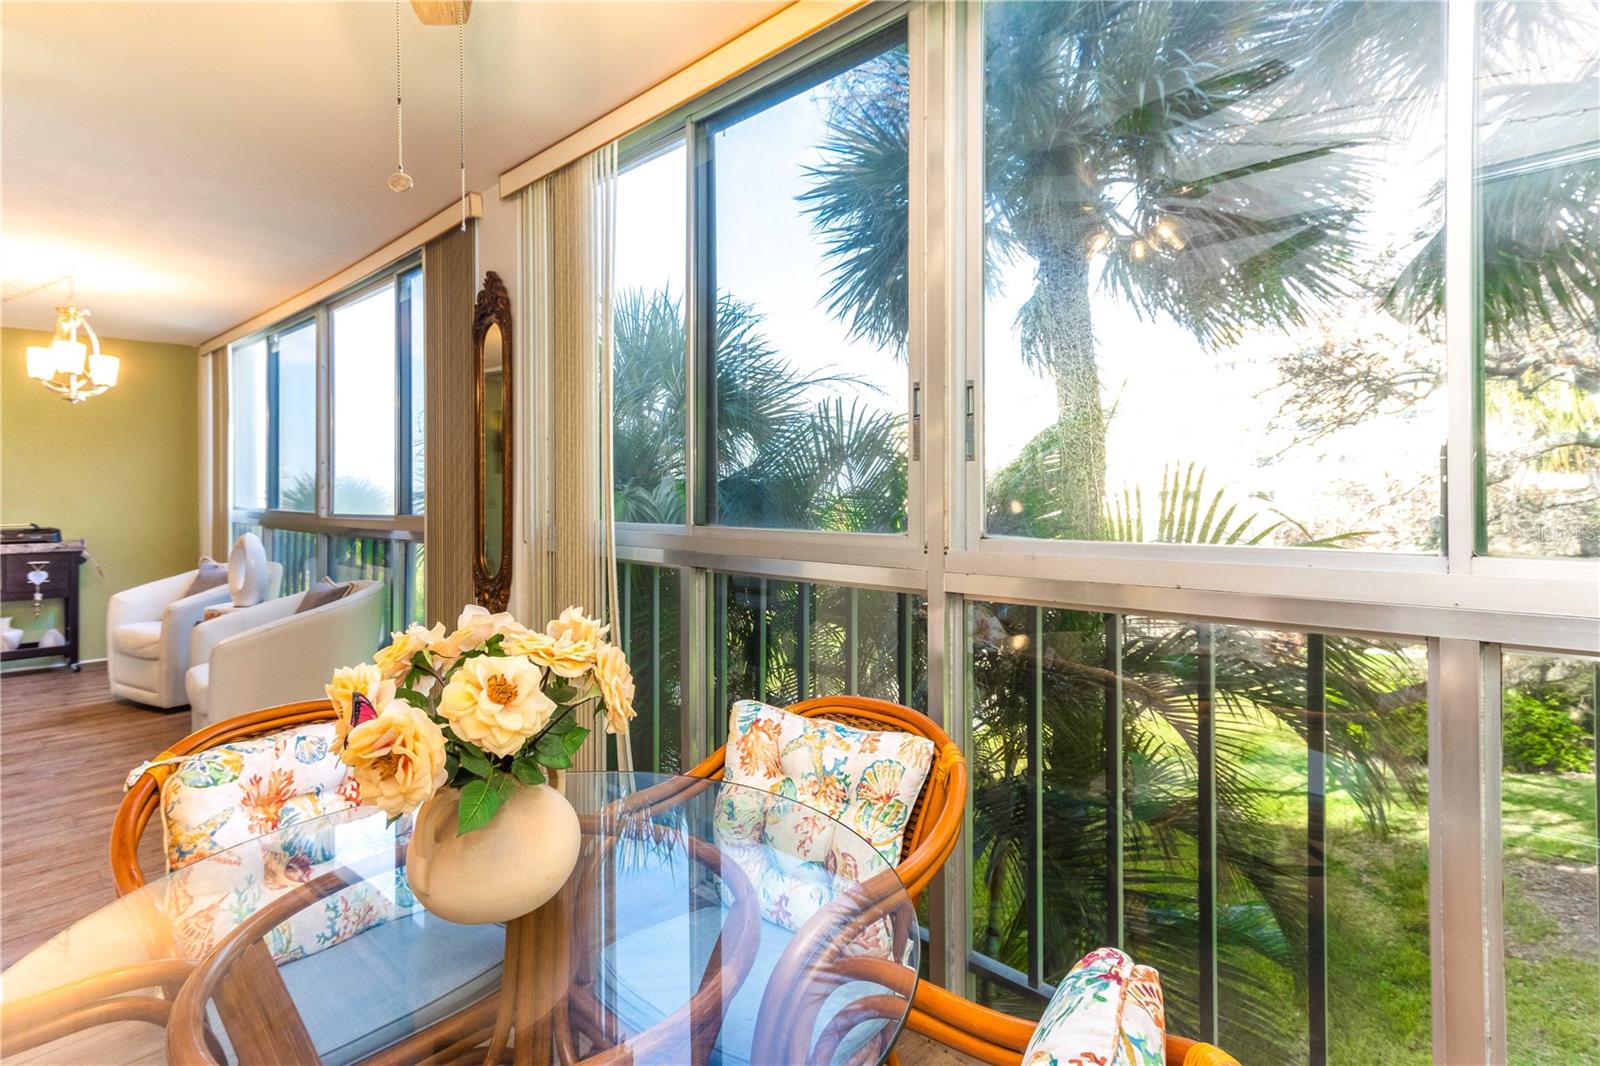 Just a Wonderful Florida room, so inviting you'll want to sit there all the time.